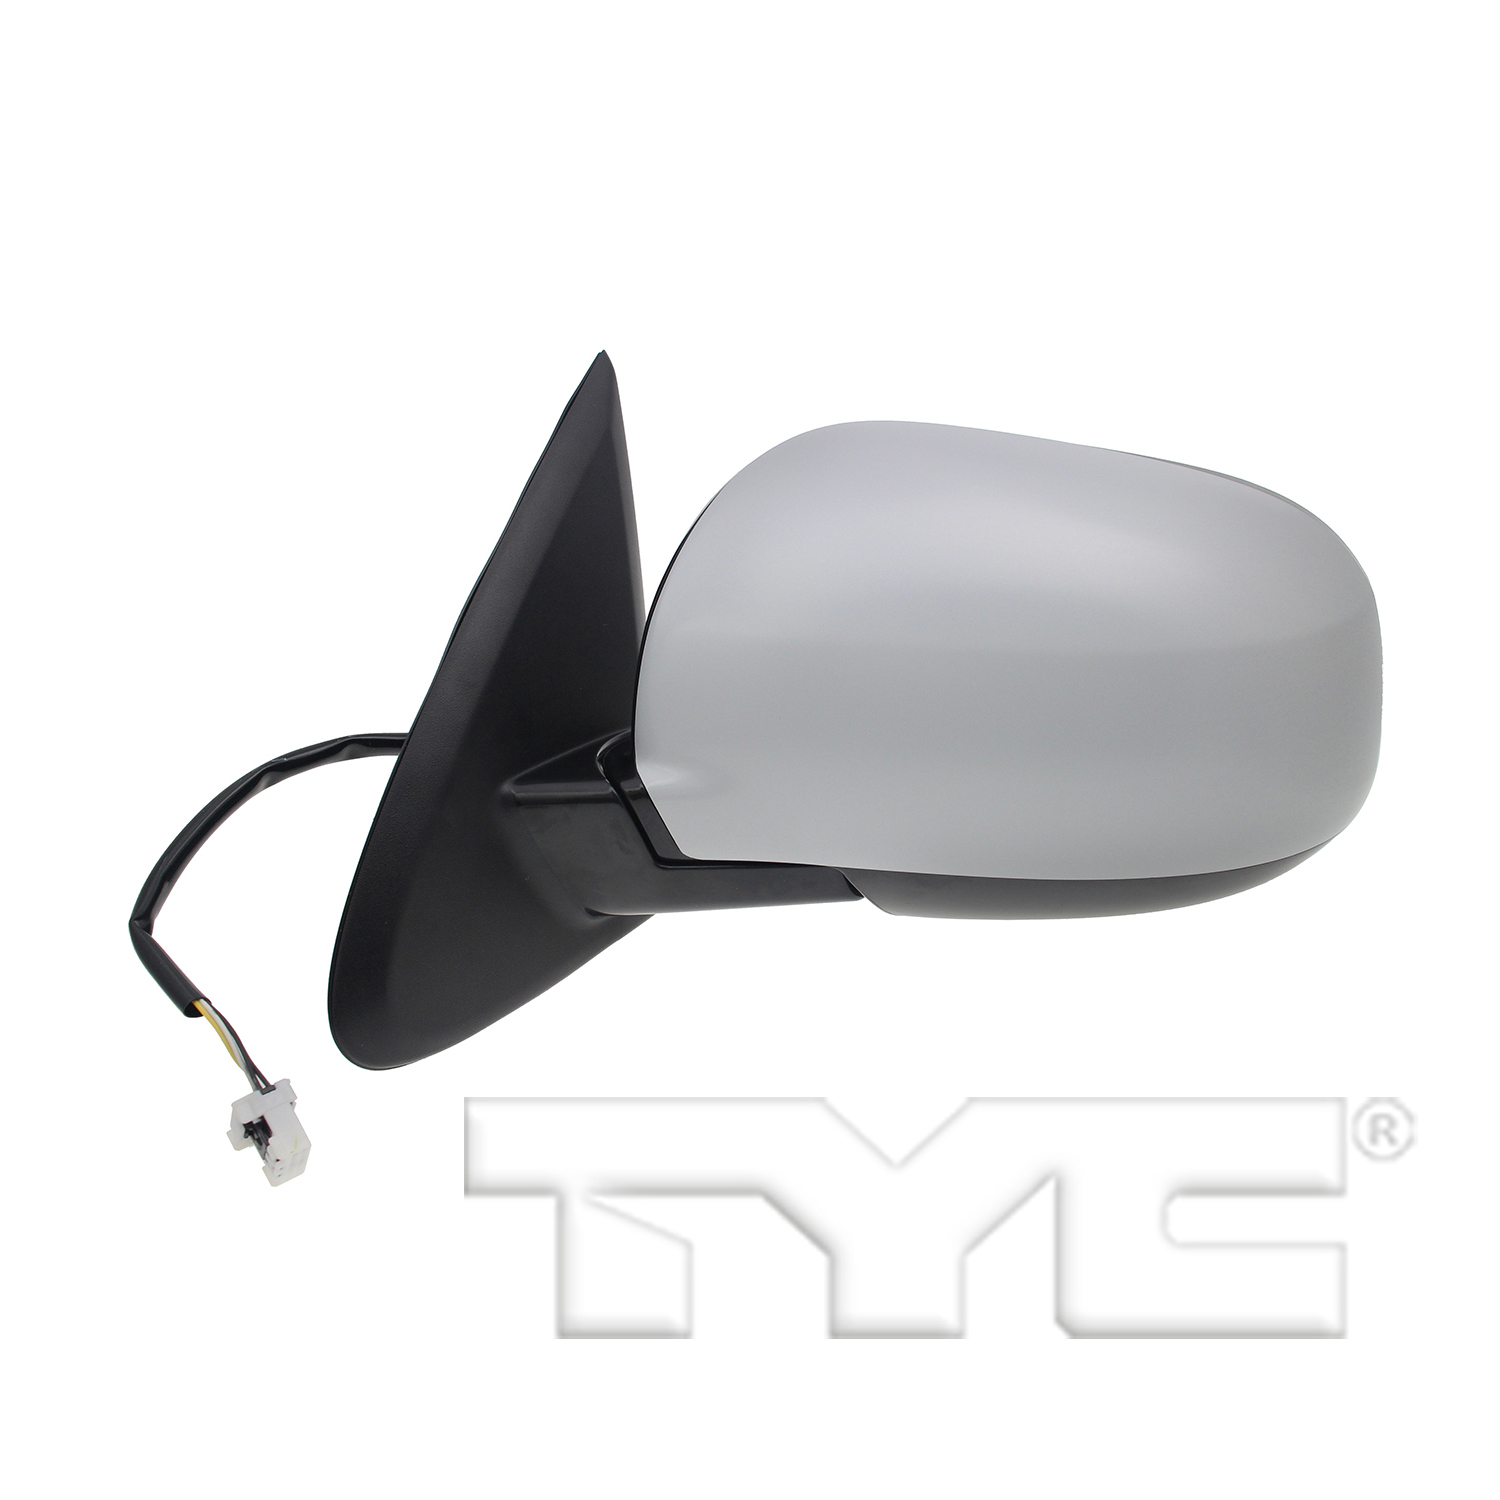 Aftermarket MIRRORS for MITSUBISHI - OUTLANDER, OUTLANDER,14-15,LT Mirror outside rear view